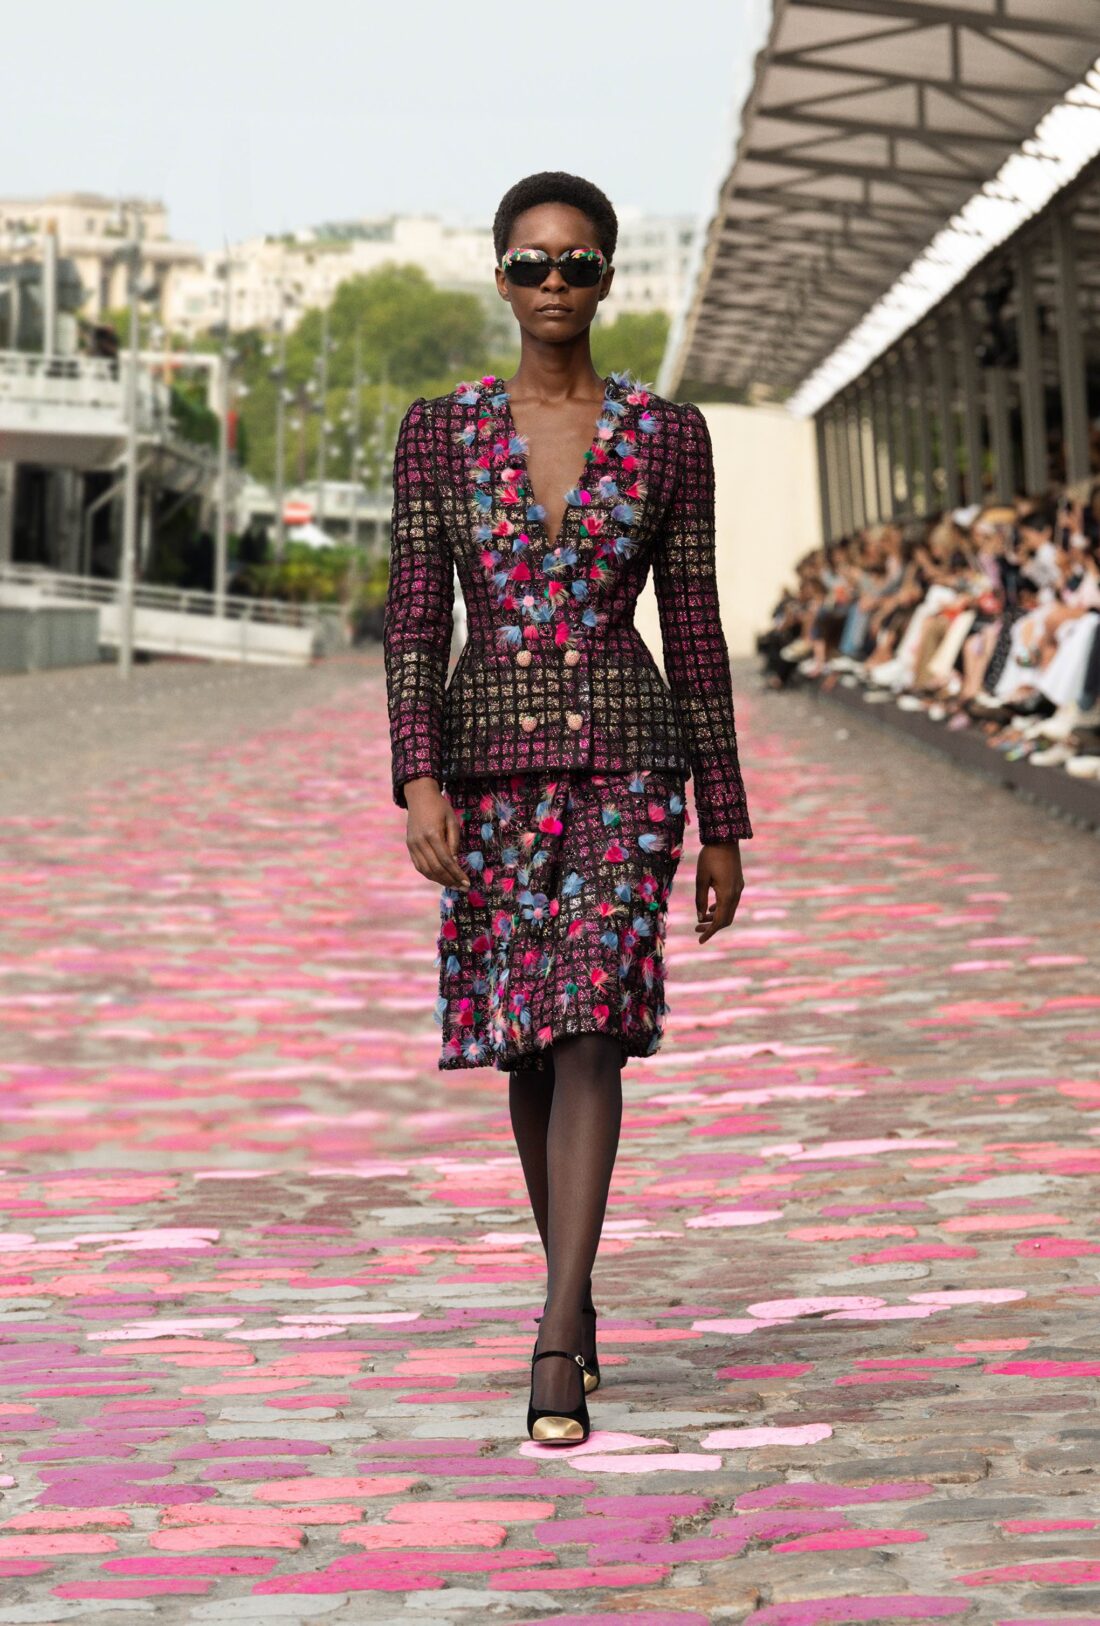 The CHANEL Fall Winter 2023/24 Ready-to-Wear Show